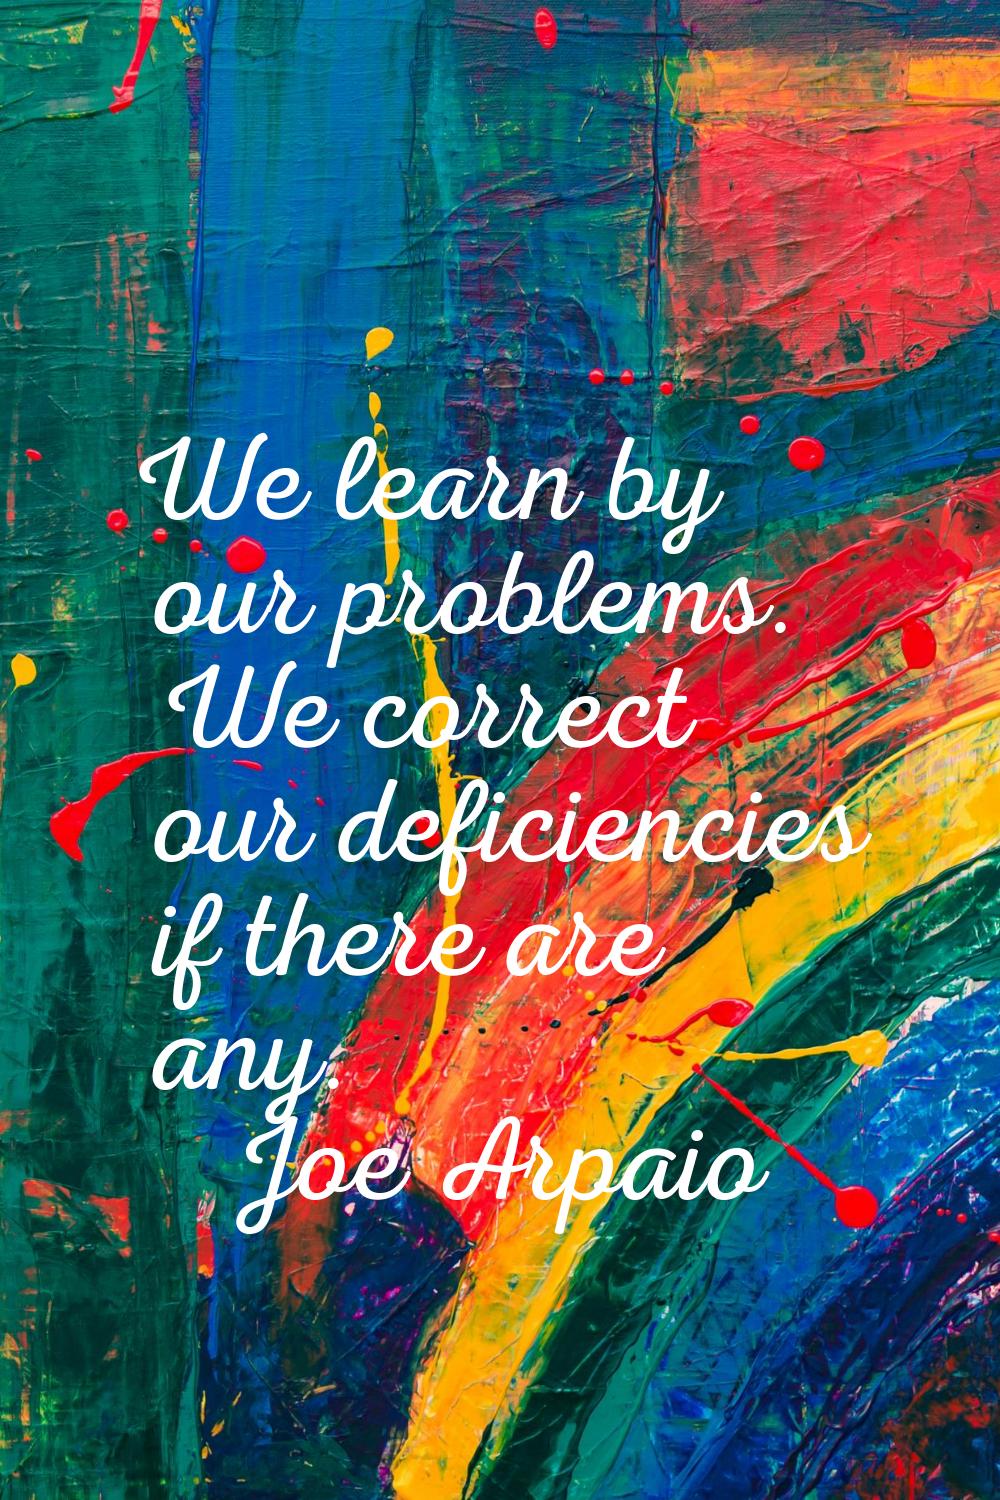 We learn by our problems. We correct our deficiencies if there are any.